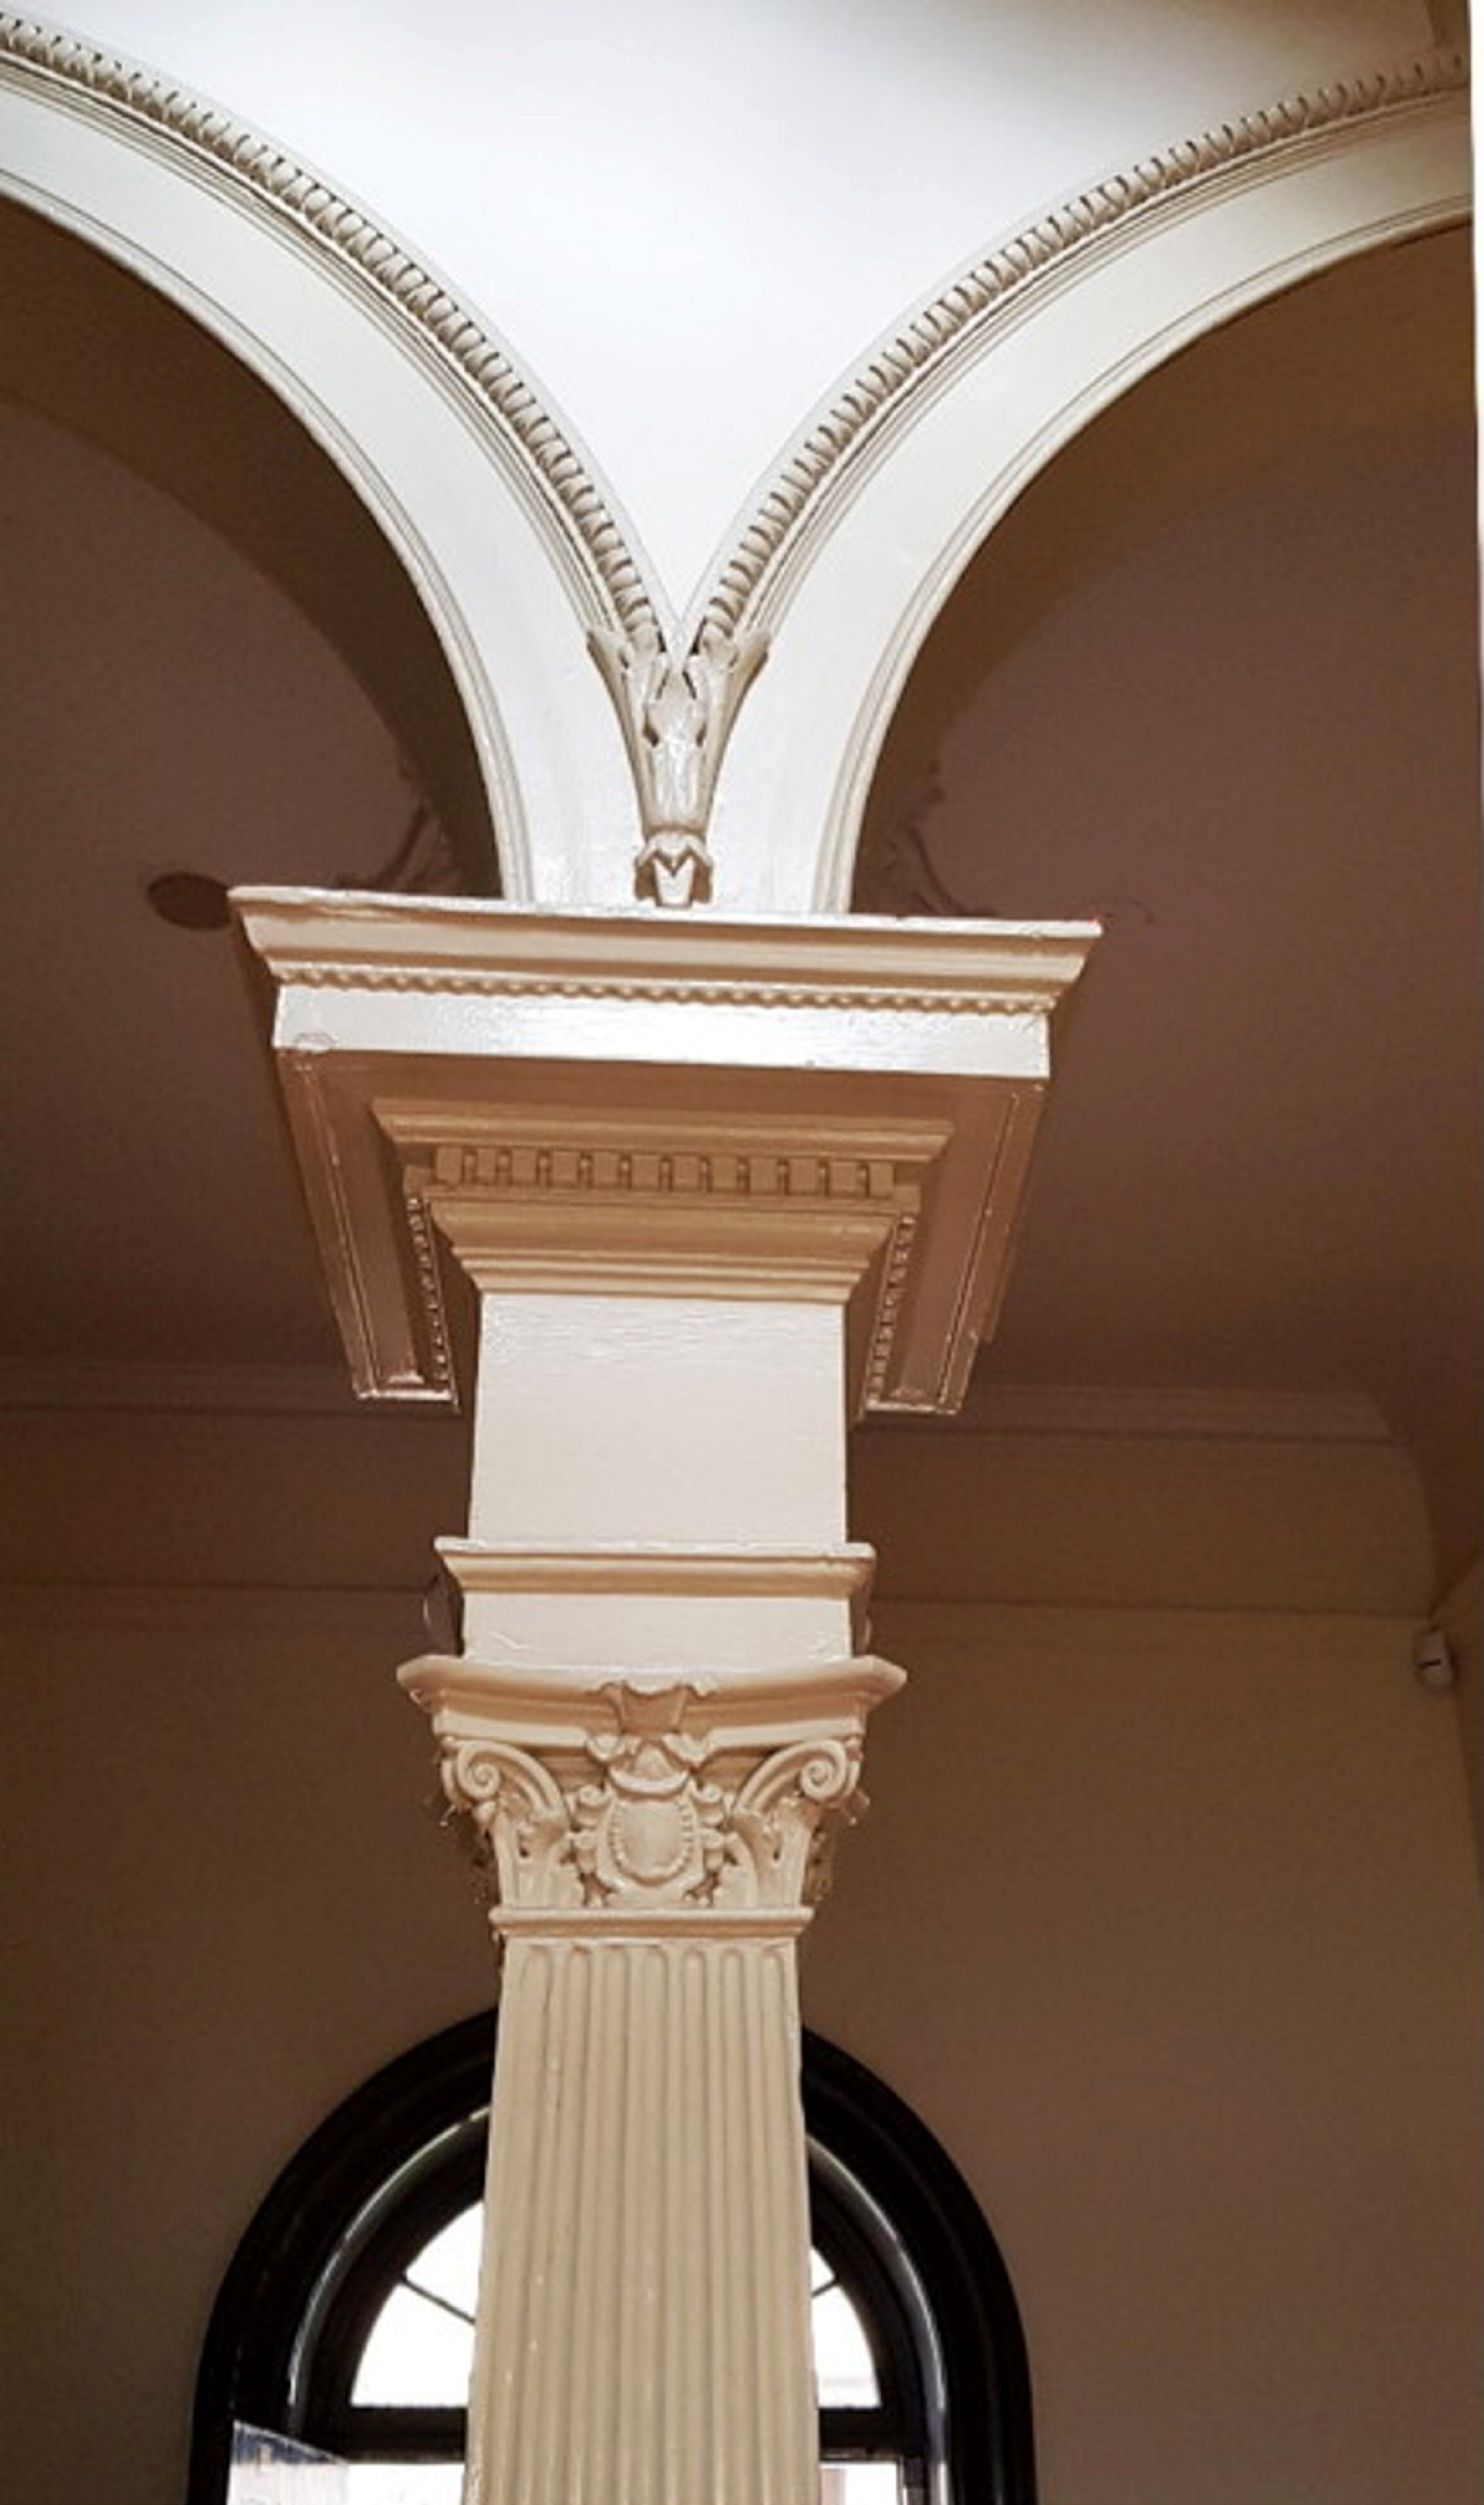 Image of the Corinthian capital supporting the archways at The Mint.